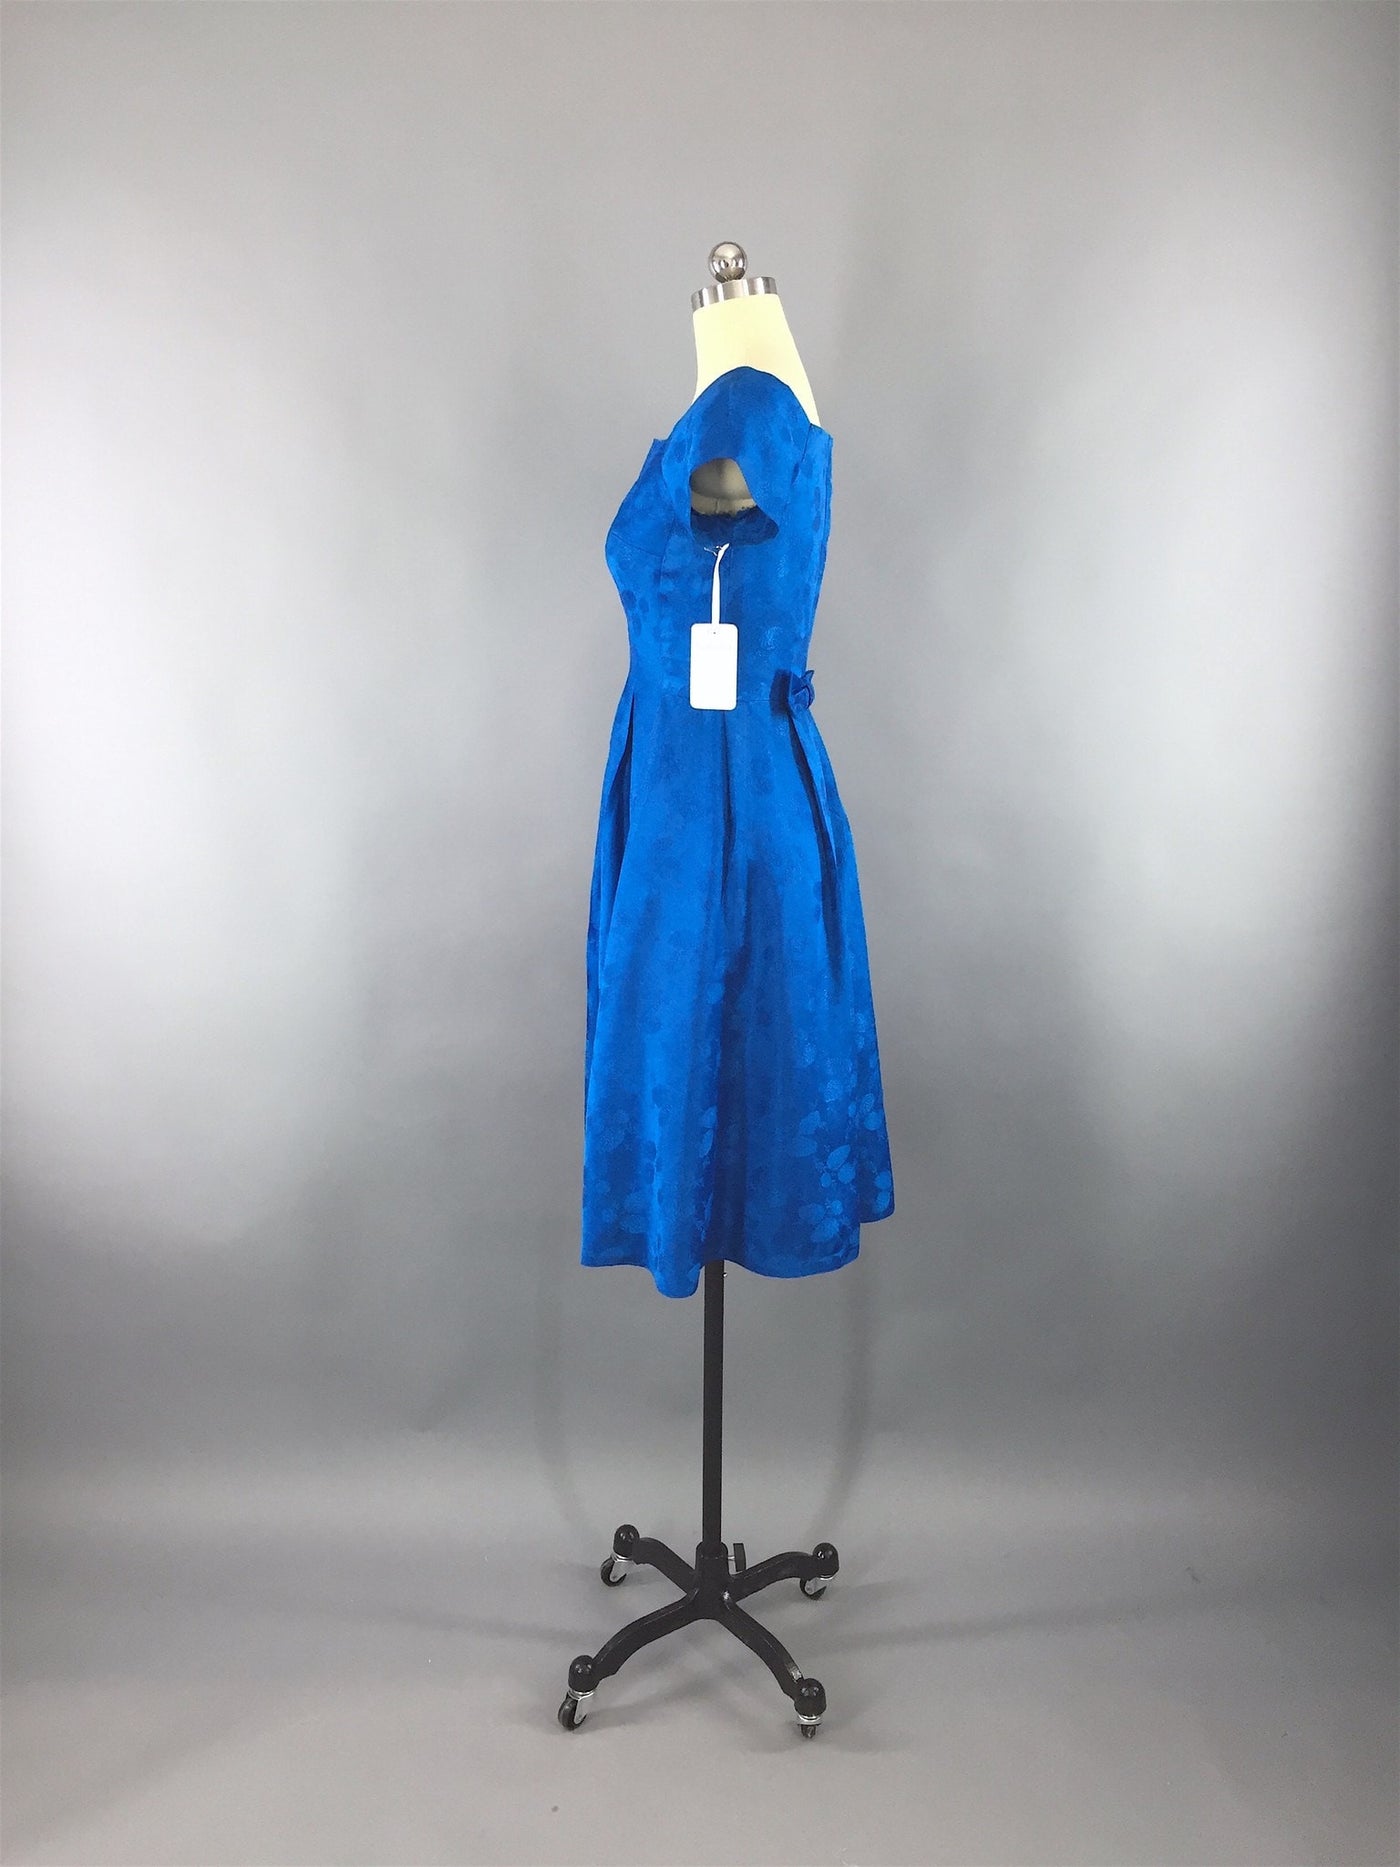 1950s Vintage Electric Blue Satin Damask Party Dress - ThisBlueBird